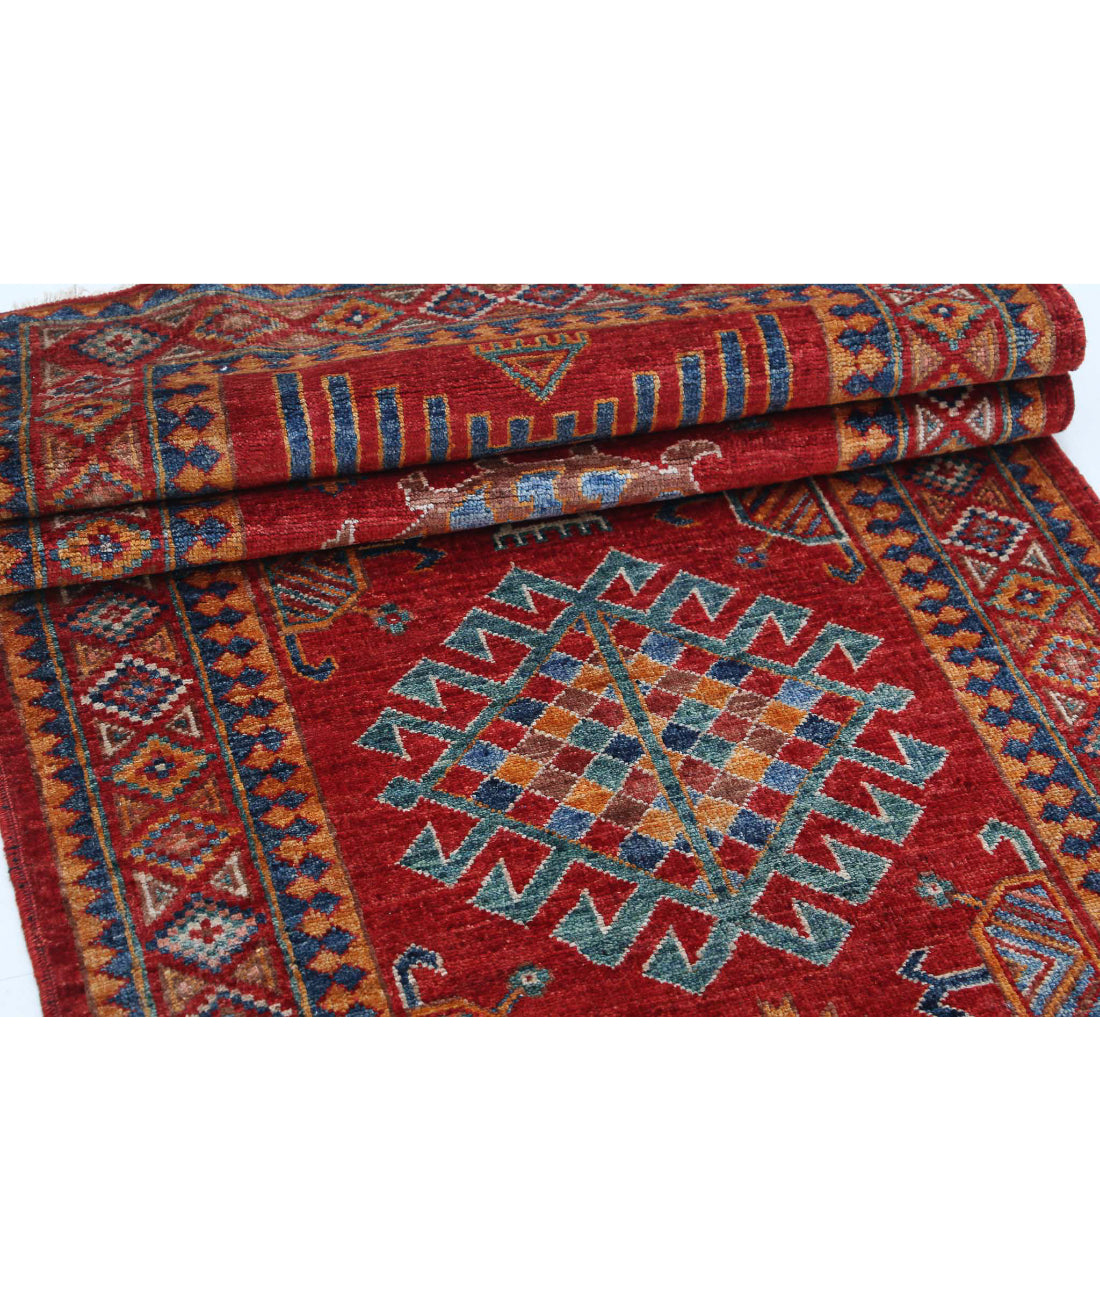 Hand Knotted Nomadic Caucasian Humna Wool Rug - 2'10'' x 8'3'' 2'10'' x 8'3'' (85 X 248) / Red / Blue